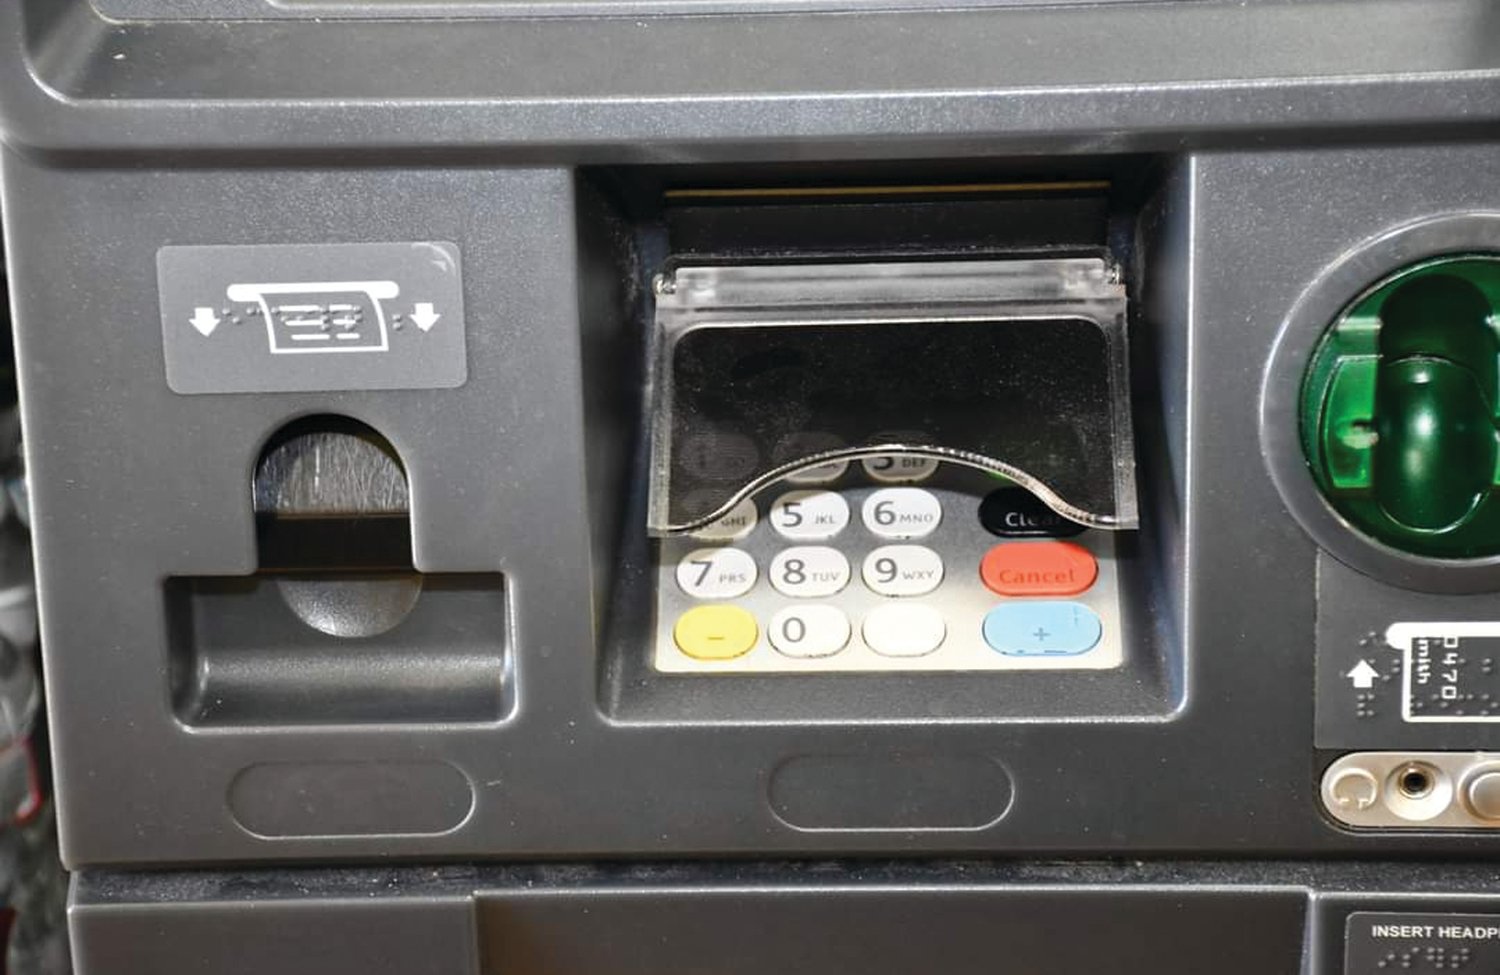 SCAN FIRST: Police found a skimming device attached to this ATM on Killingly Street. If you utilized the machine, check your bank balance and report any suspicious activity to police and your bank.